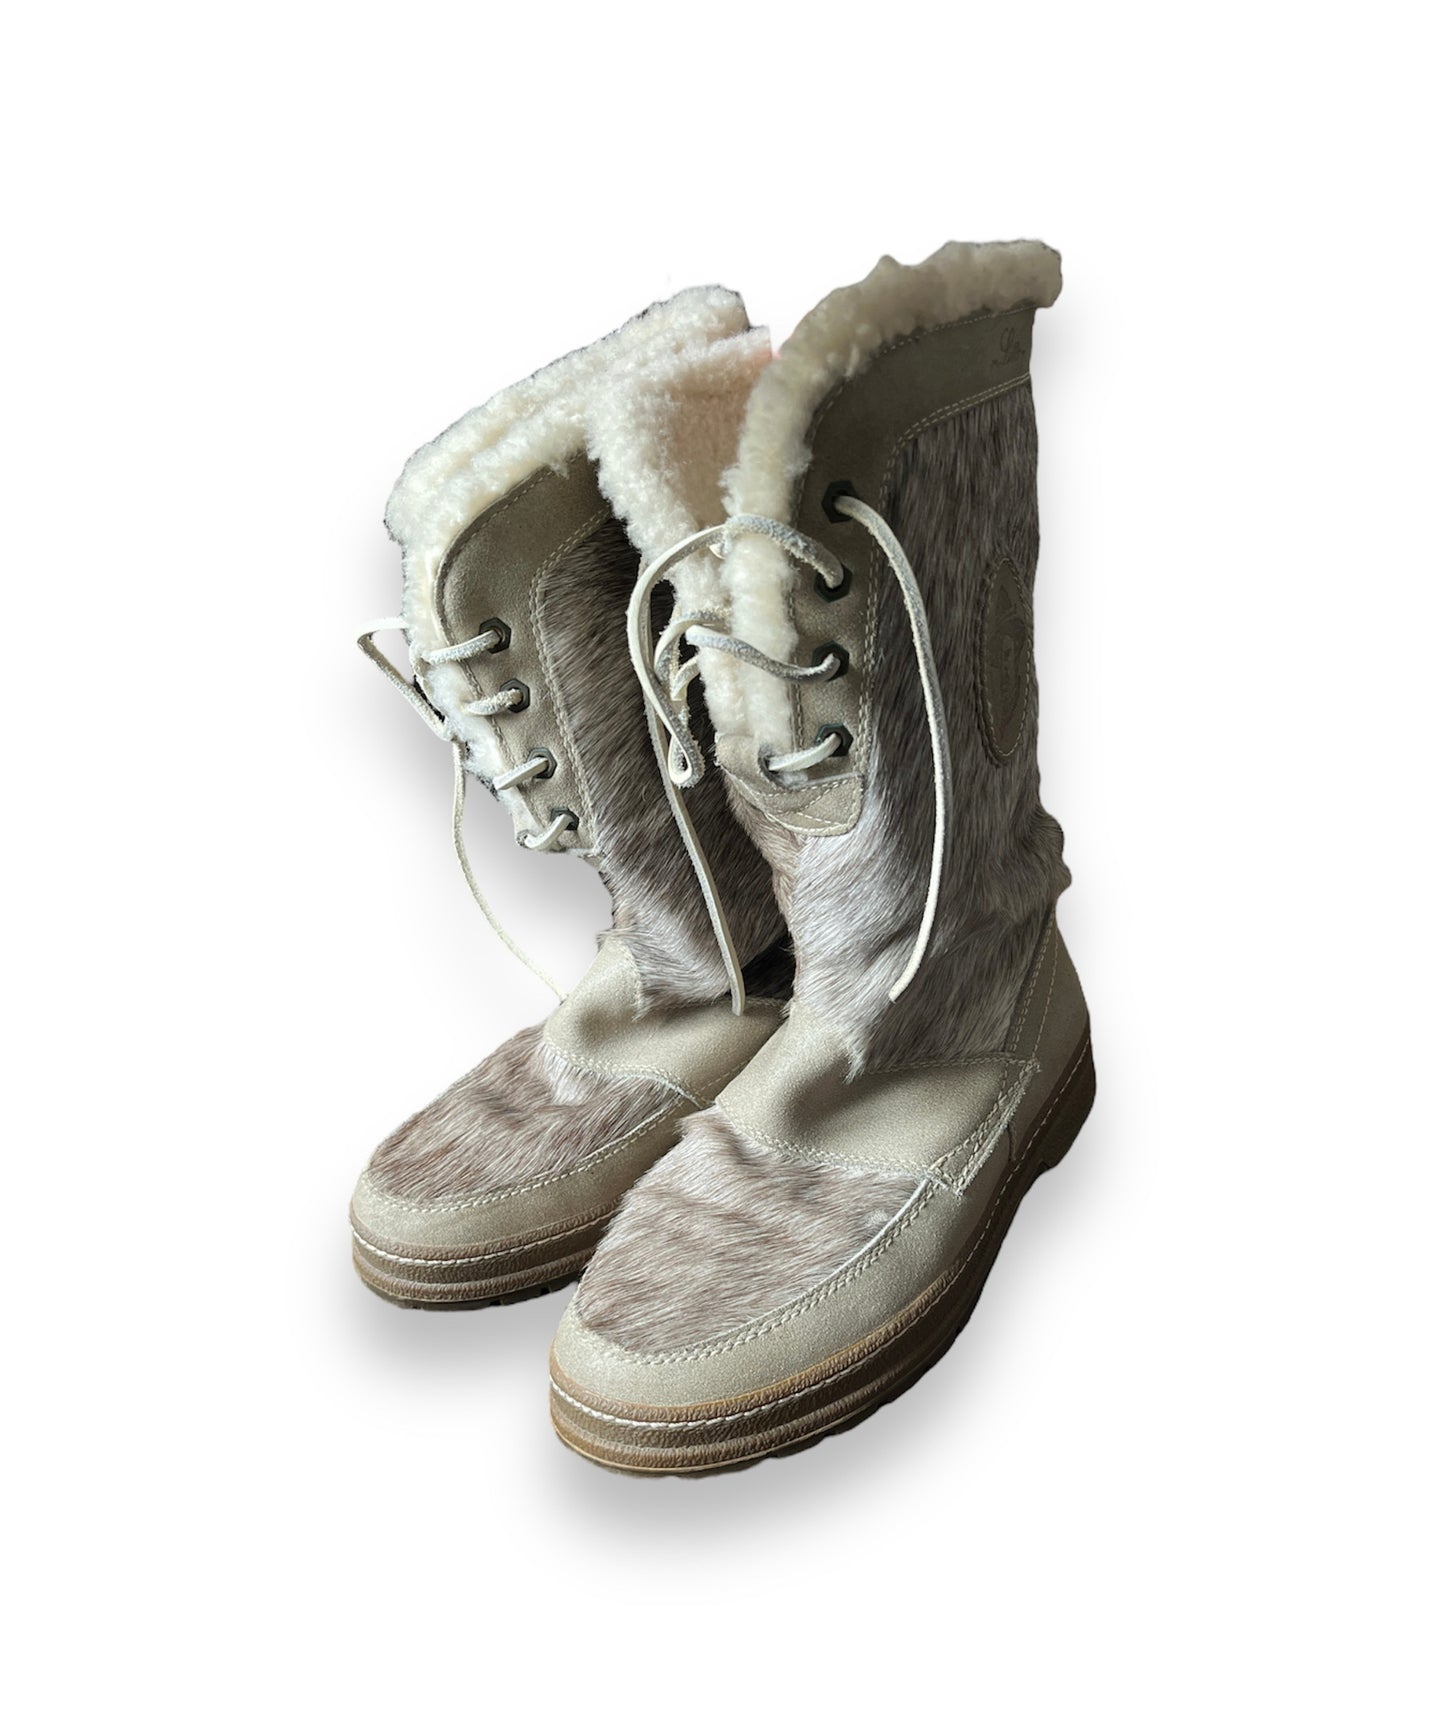 Vintage Outdoor Lotto boots